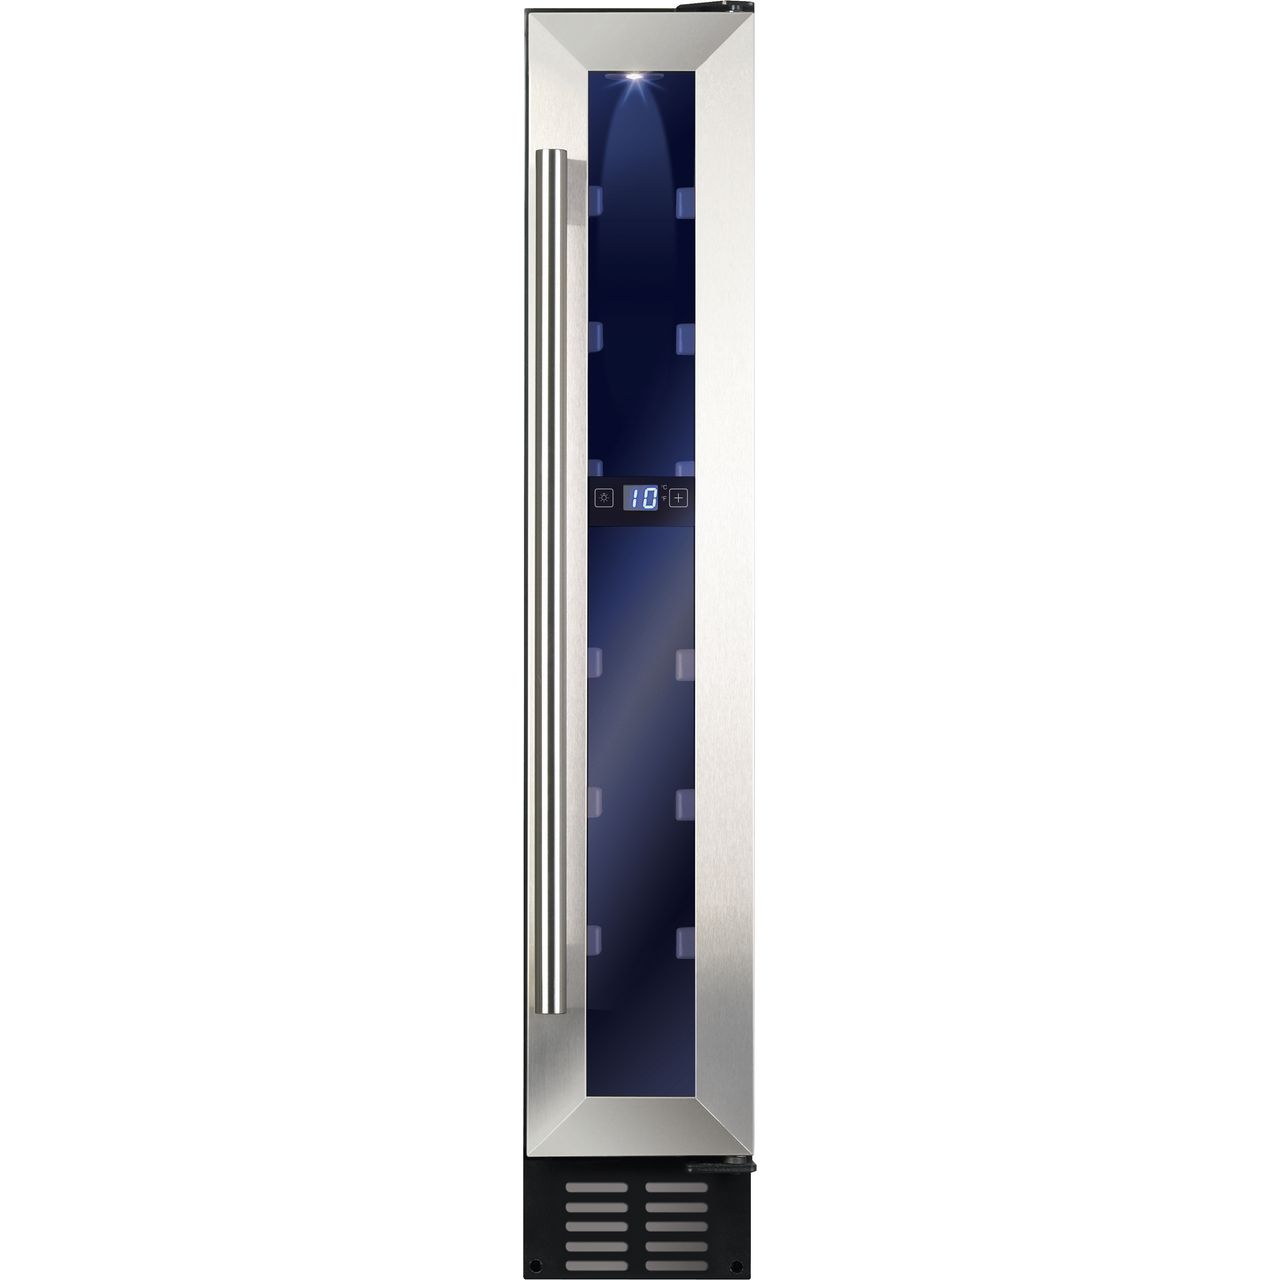 Amica AWC151SS Wine Cooler Review